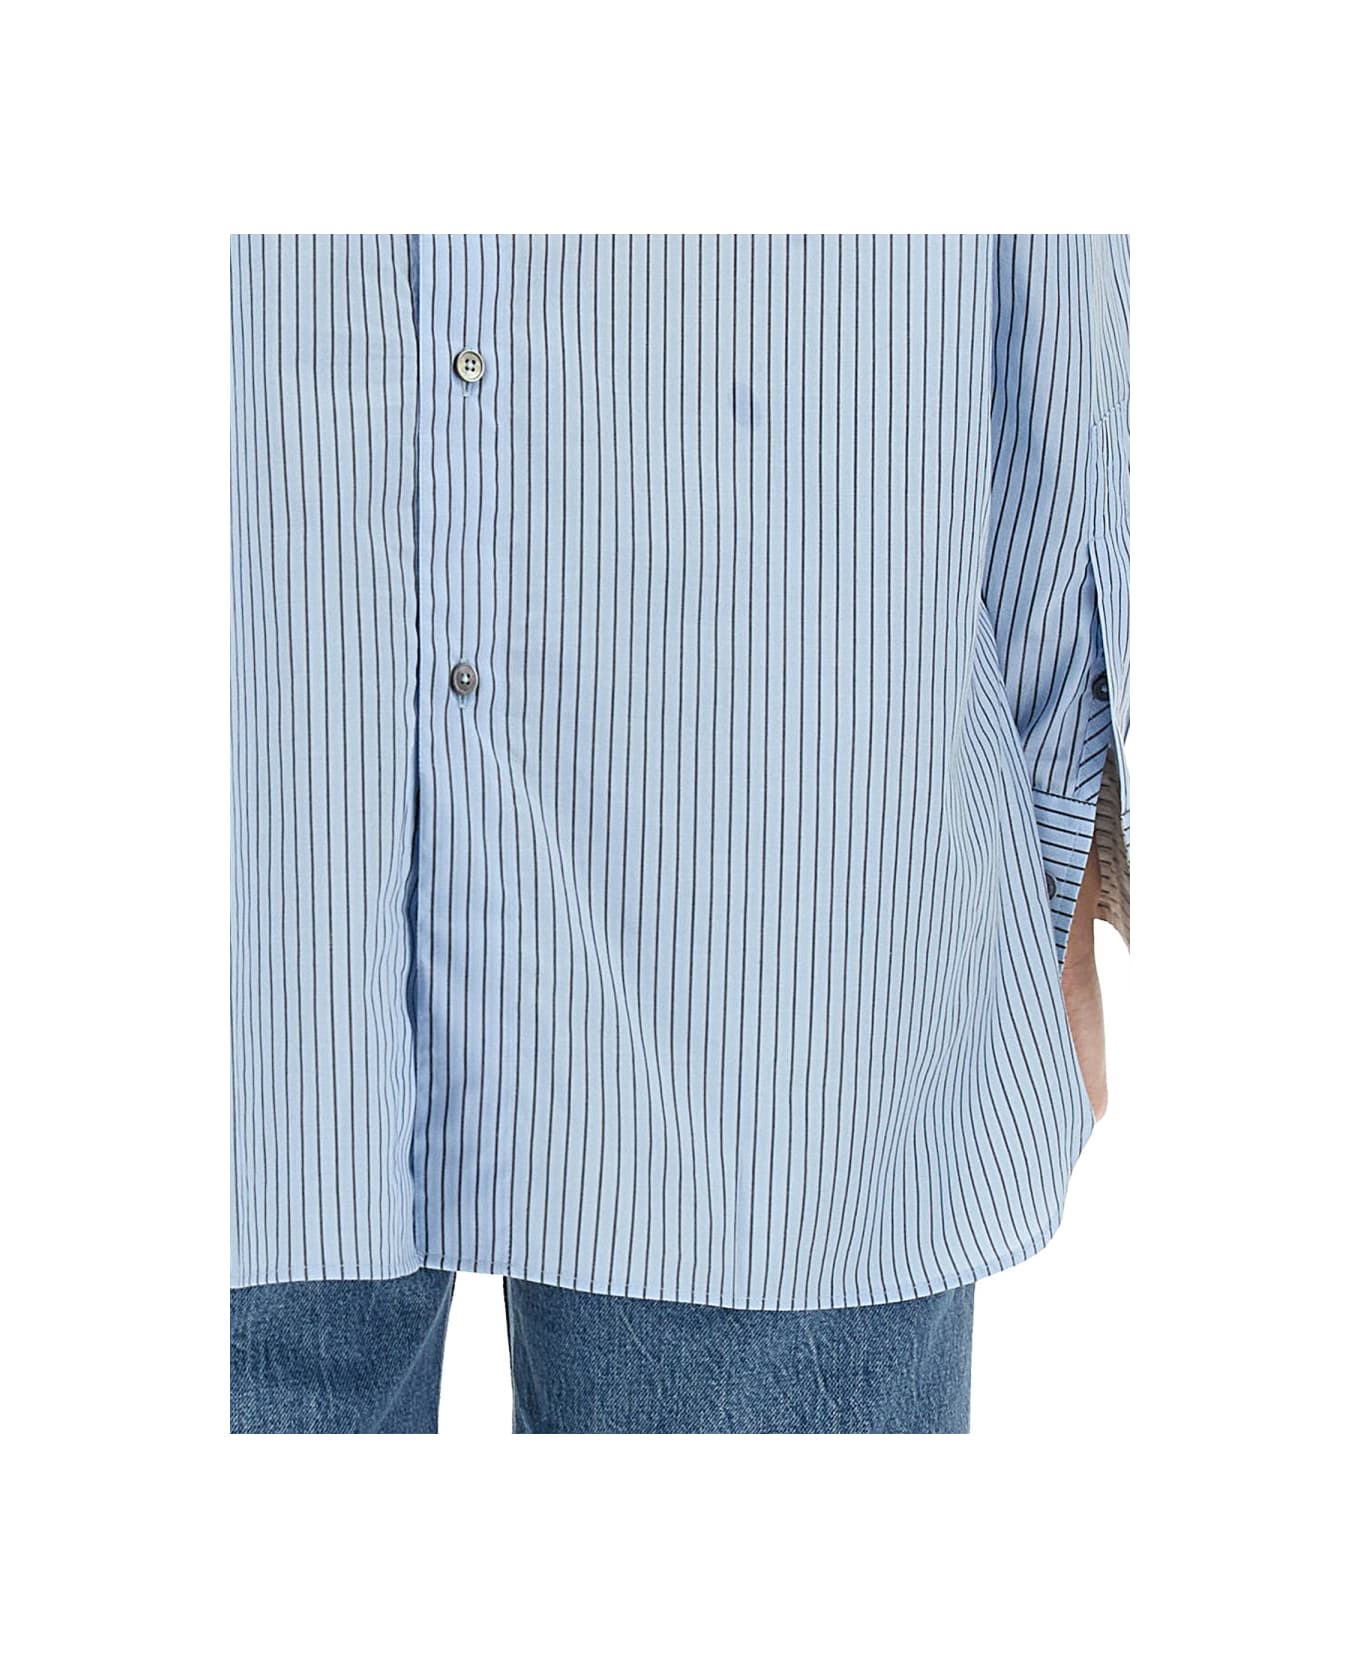 Paul Smith Striped Shirt - BABY BLUE シャツ